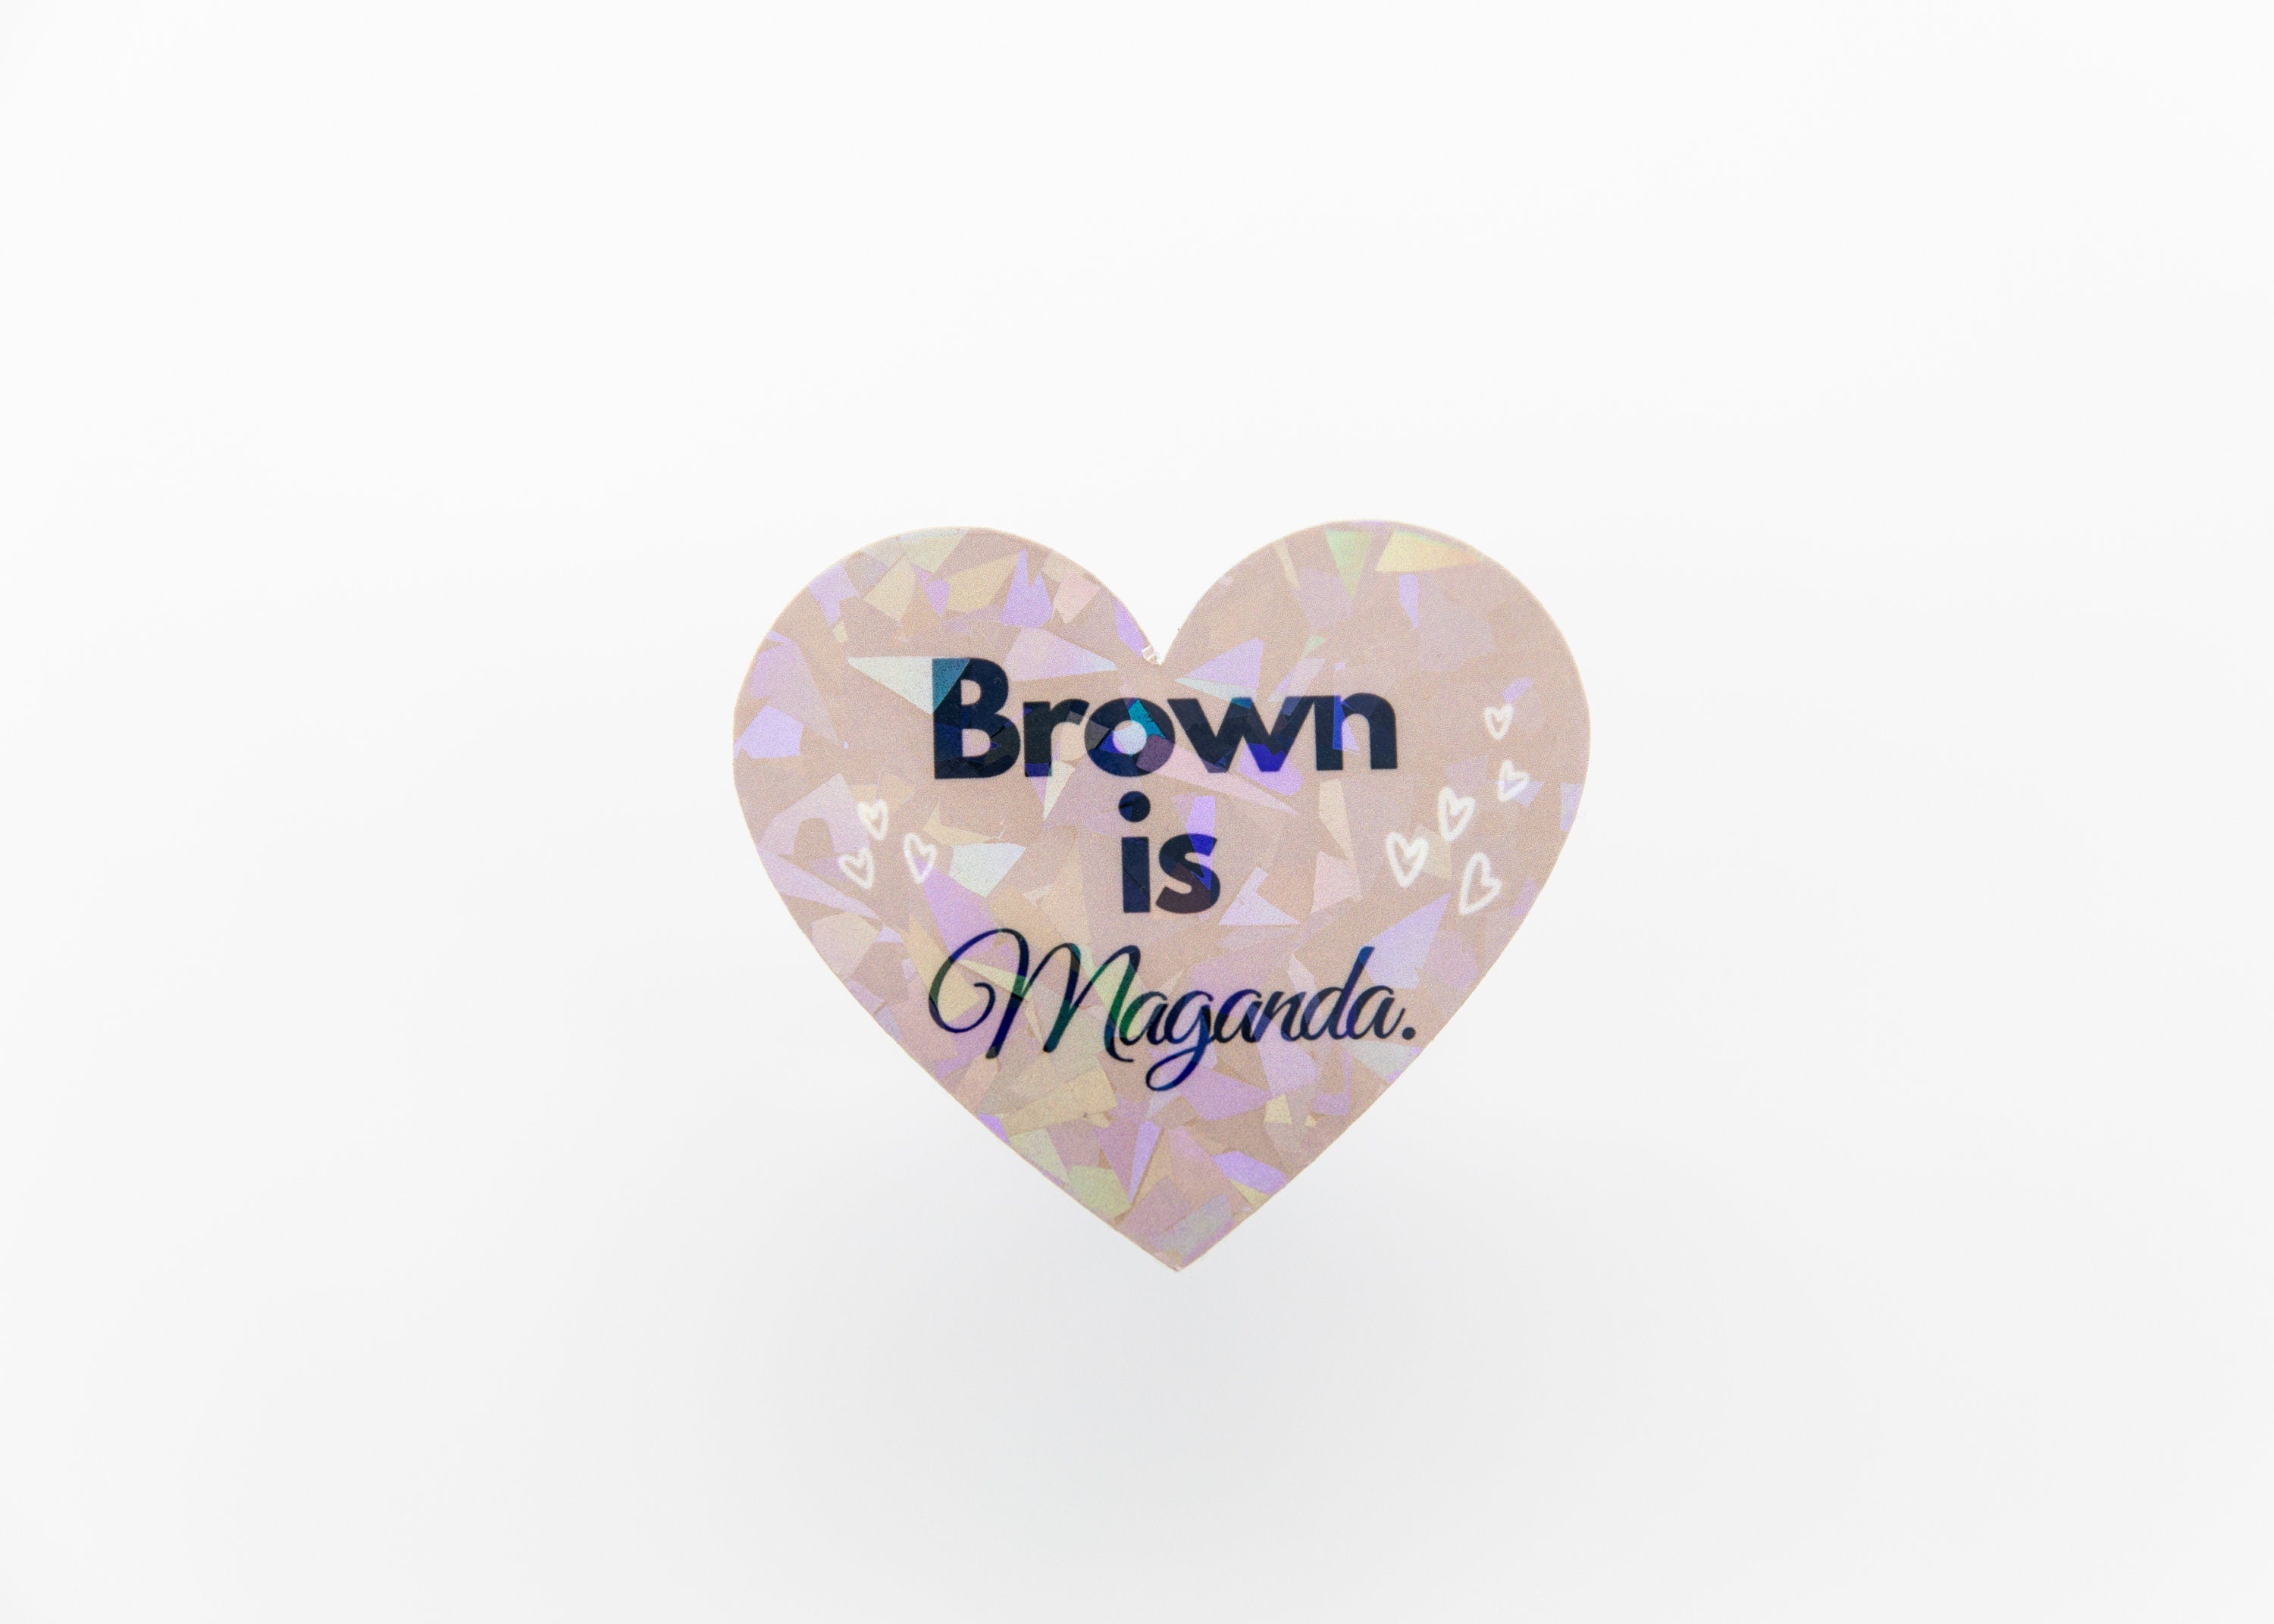 Mie Makes Brown is Maganda Heart Sticker, Filipina Stickers, Philippines, Pinay